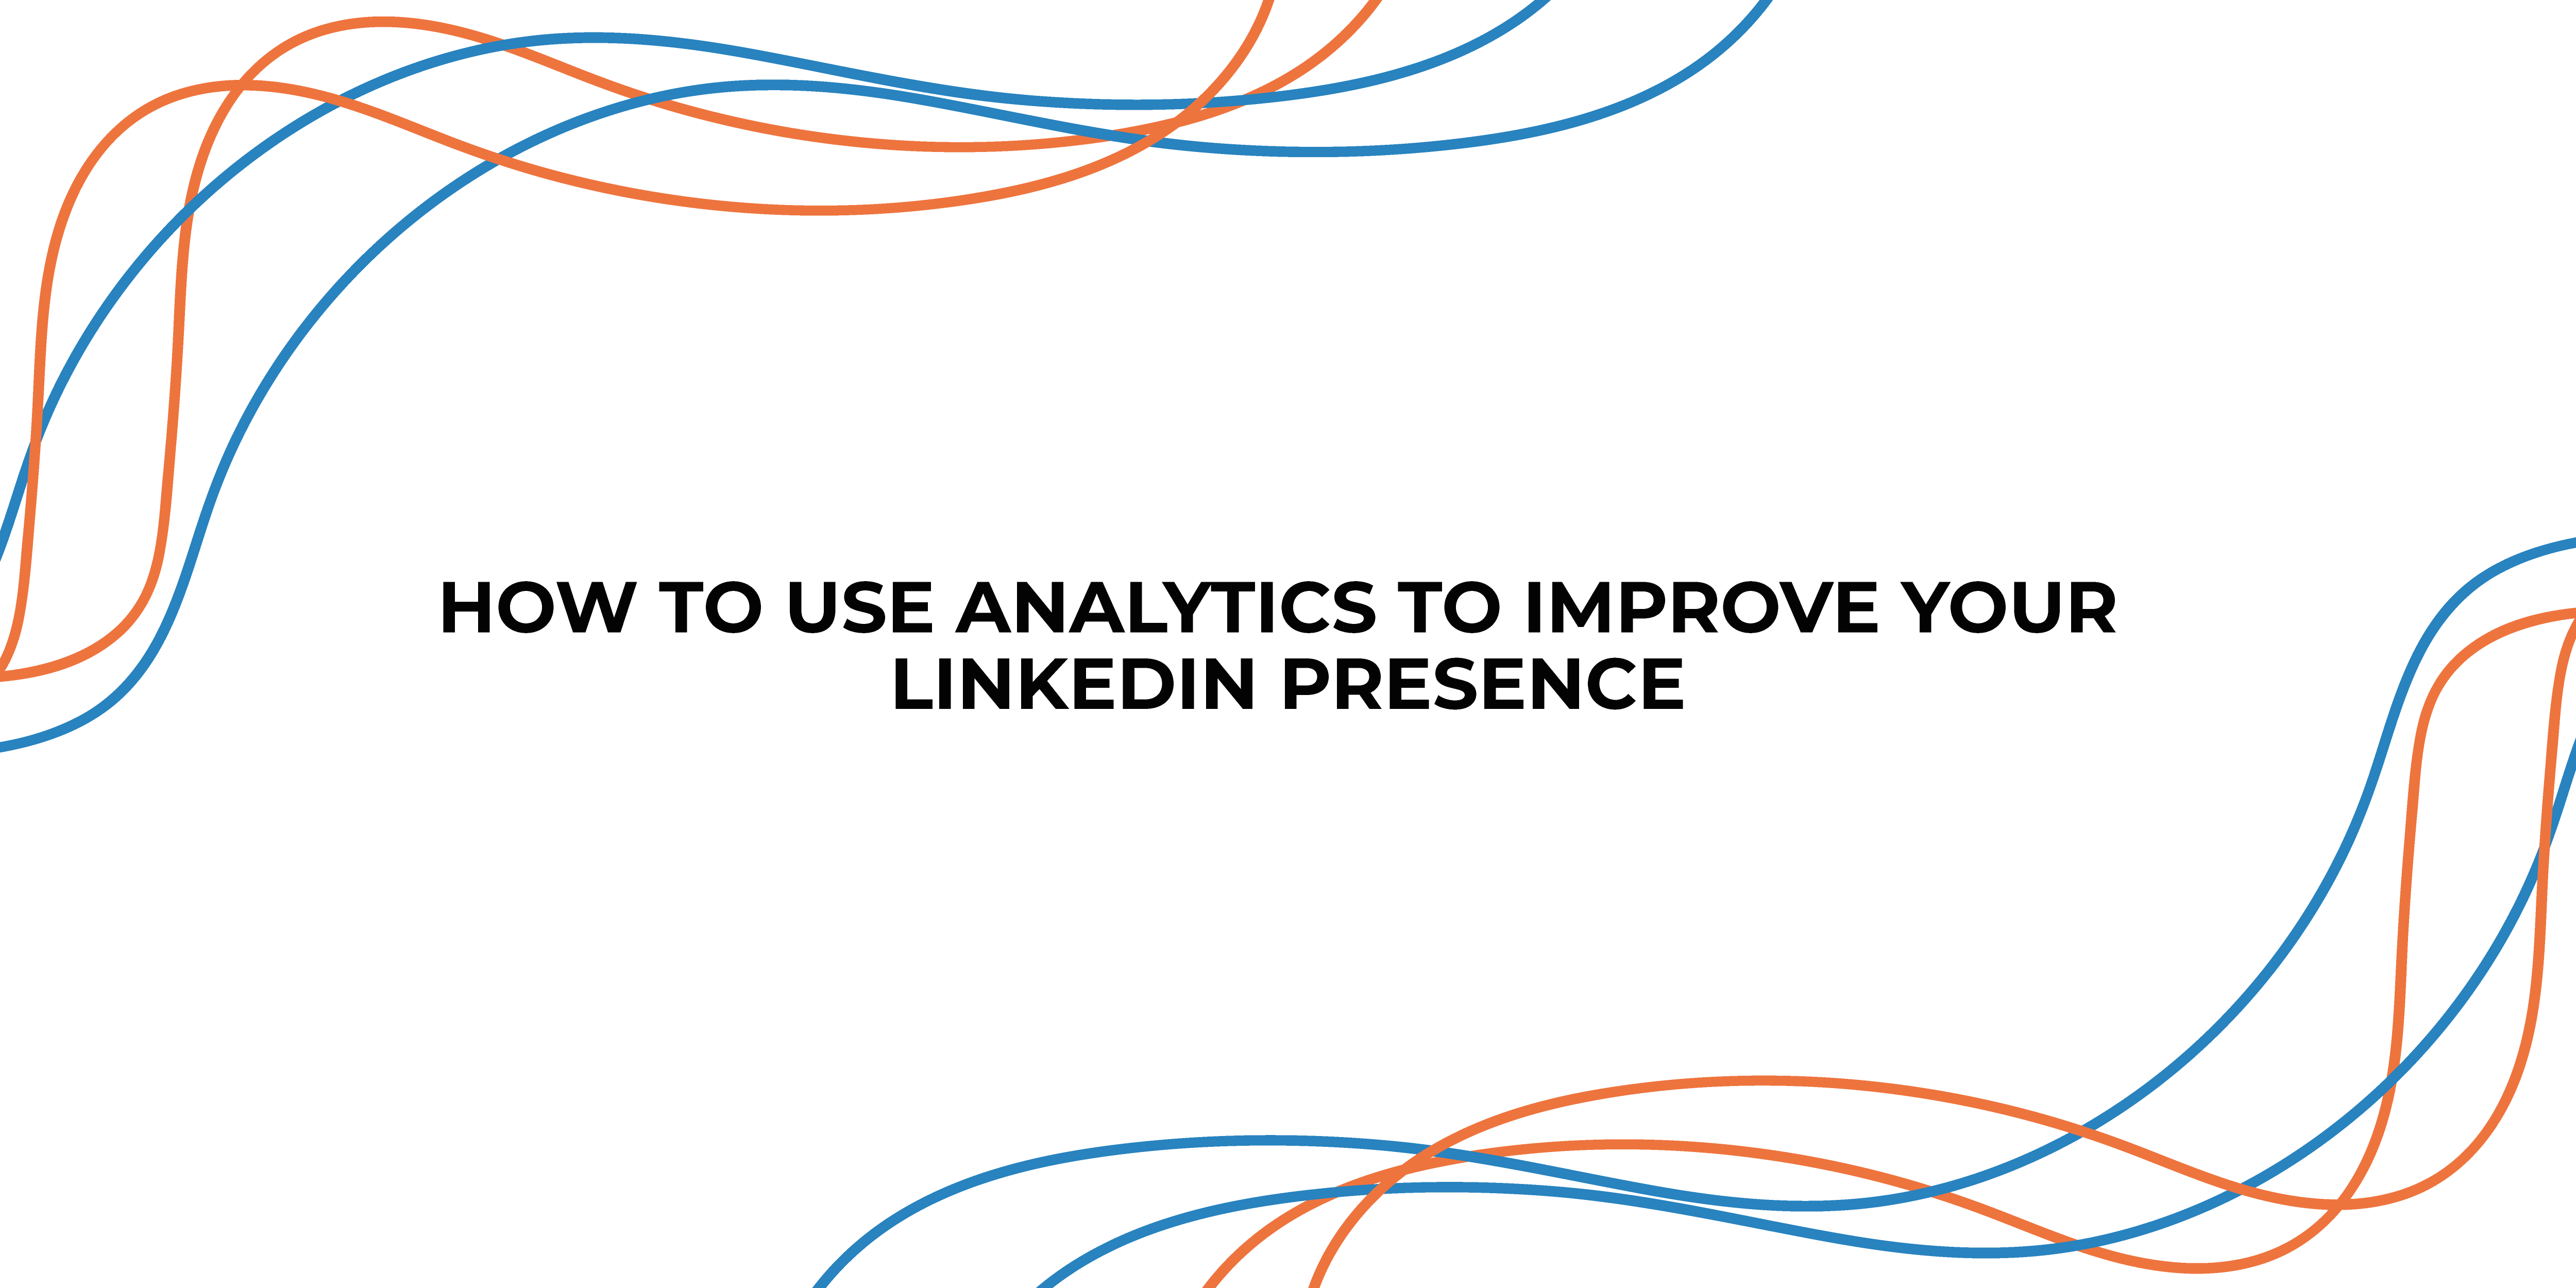 How to Use Analytics to Improve Your LinkedIn Presence